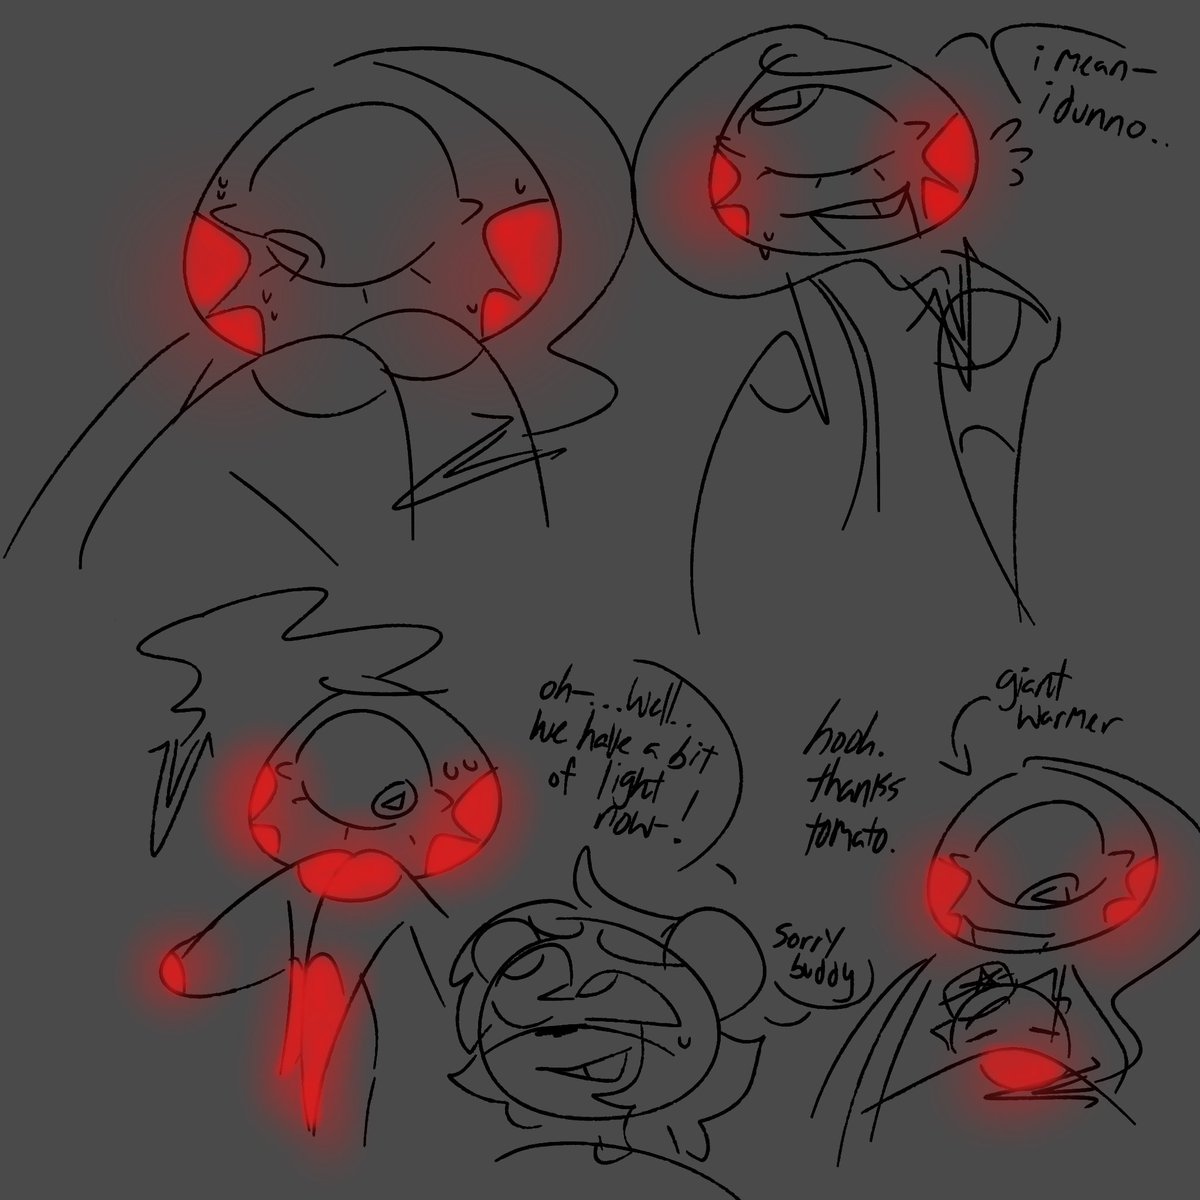 tell him abt that thing he did one time that was absolutely embarrassing and you can get some free light in a dark room 
#InvadeThePlushverse #InvadeThePlushverseQuinnvision #travisplushproductions #art #doodles #digitalart #fanart